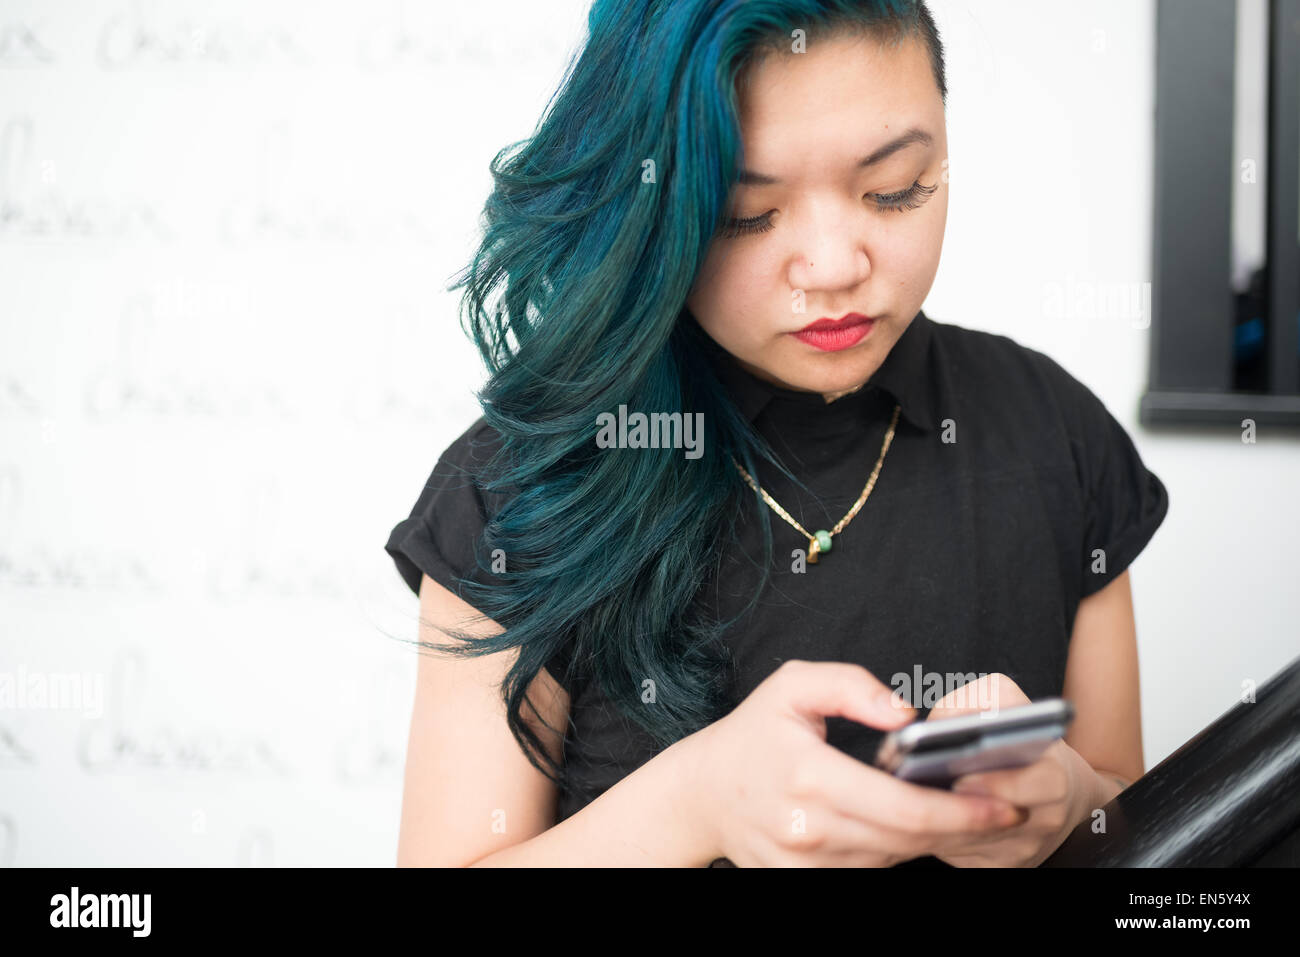 Asian woman with blue hair texting on smartphone Stock Photo